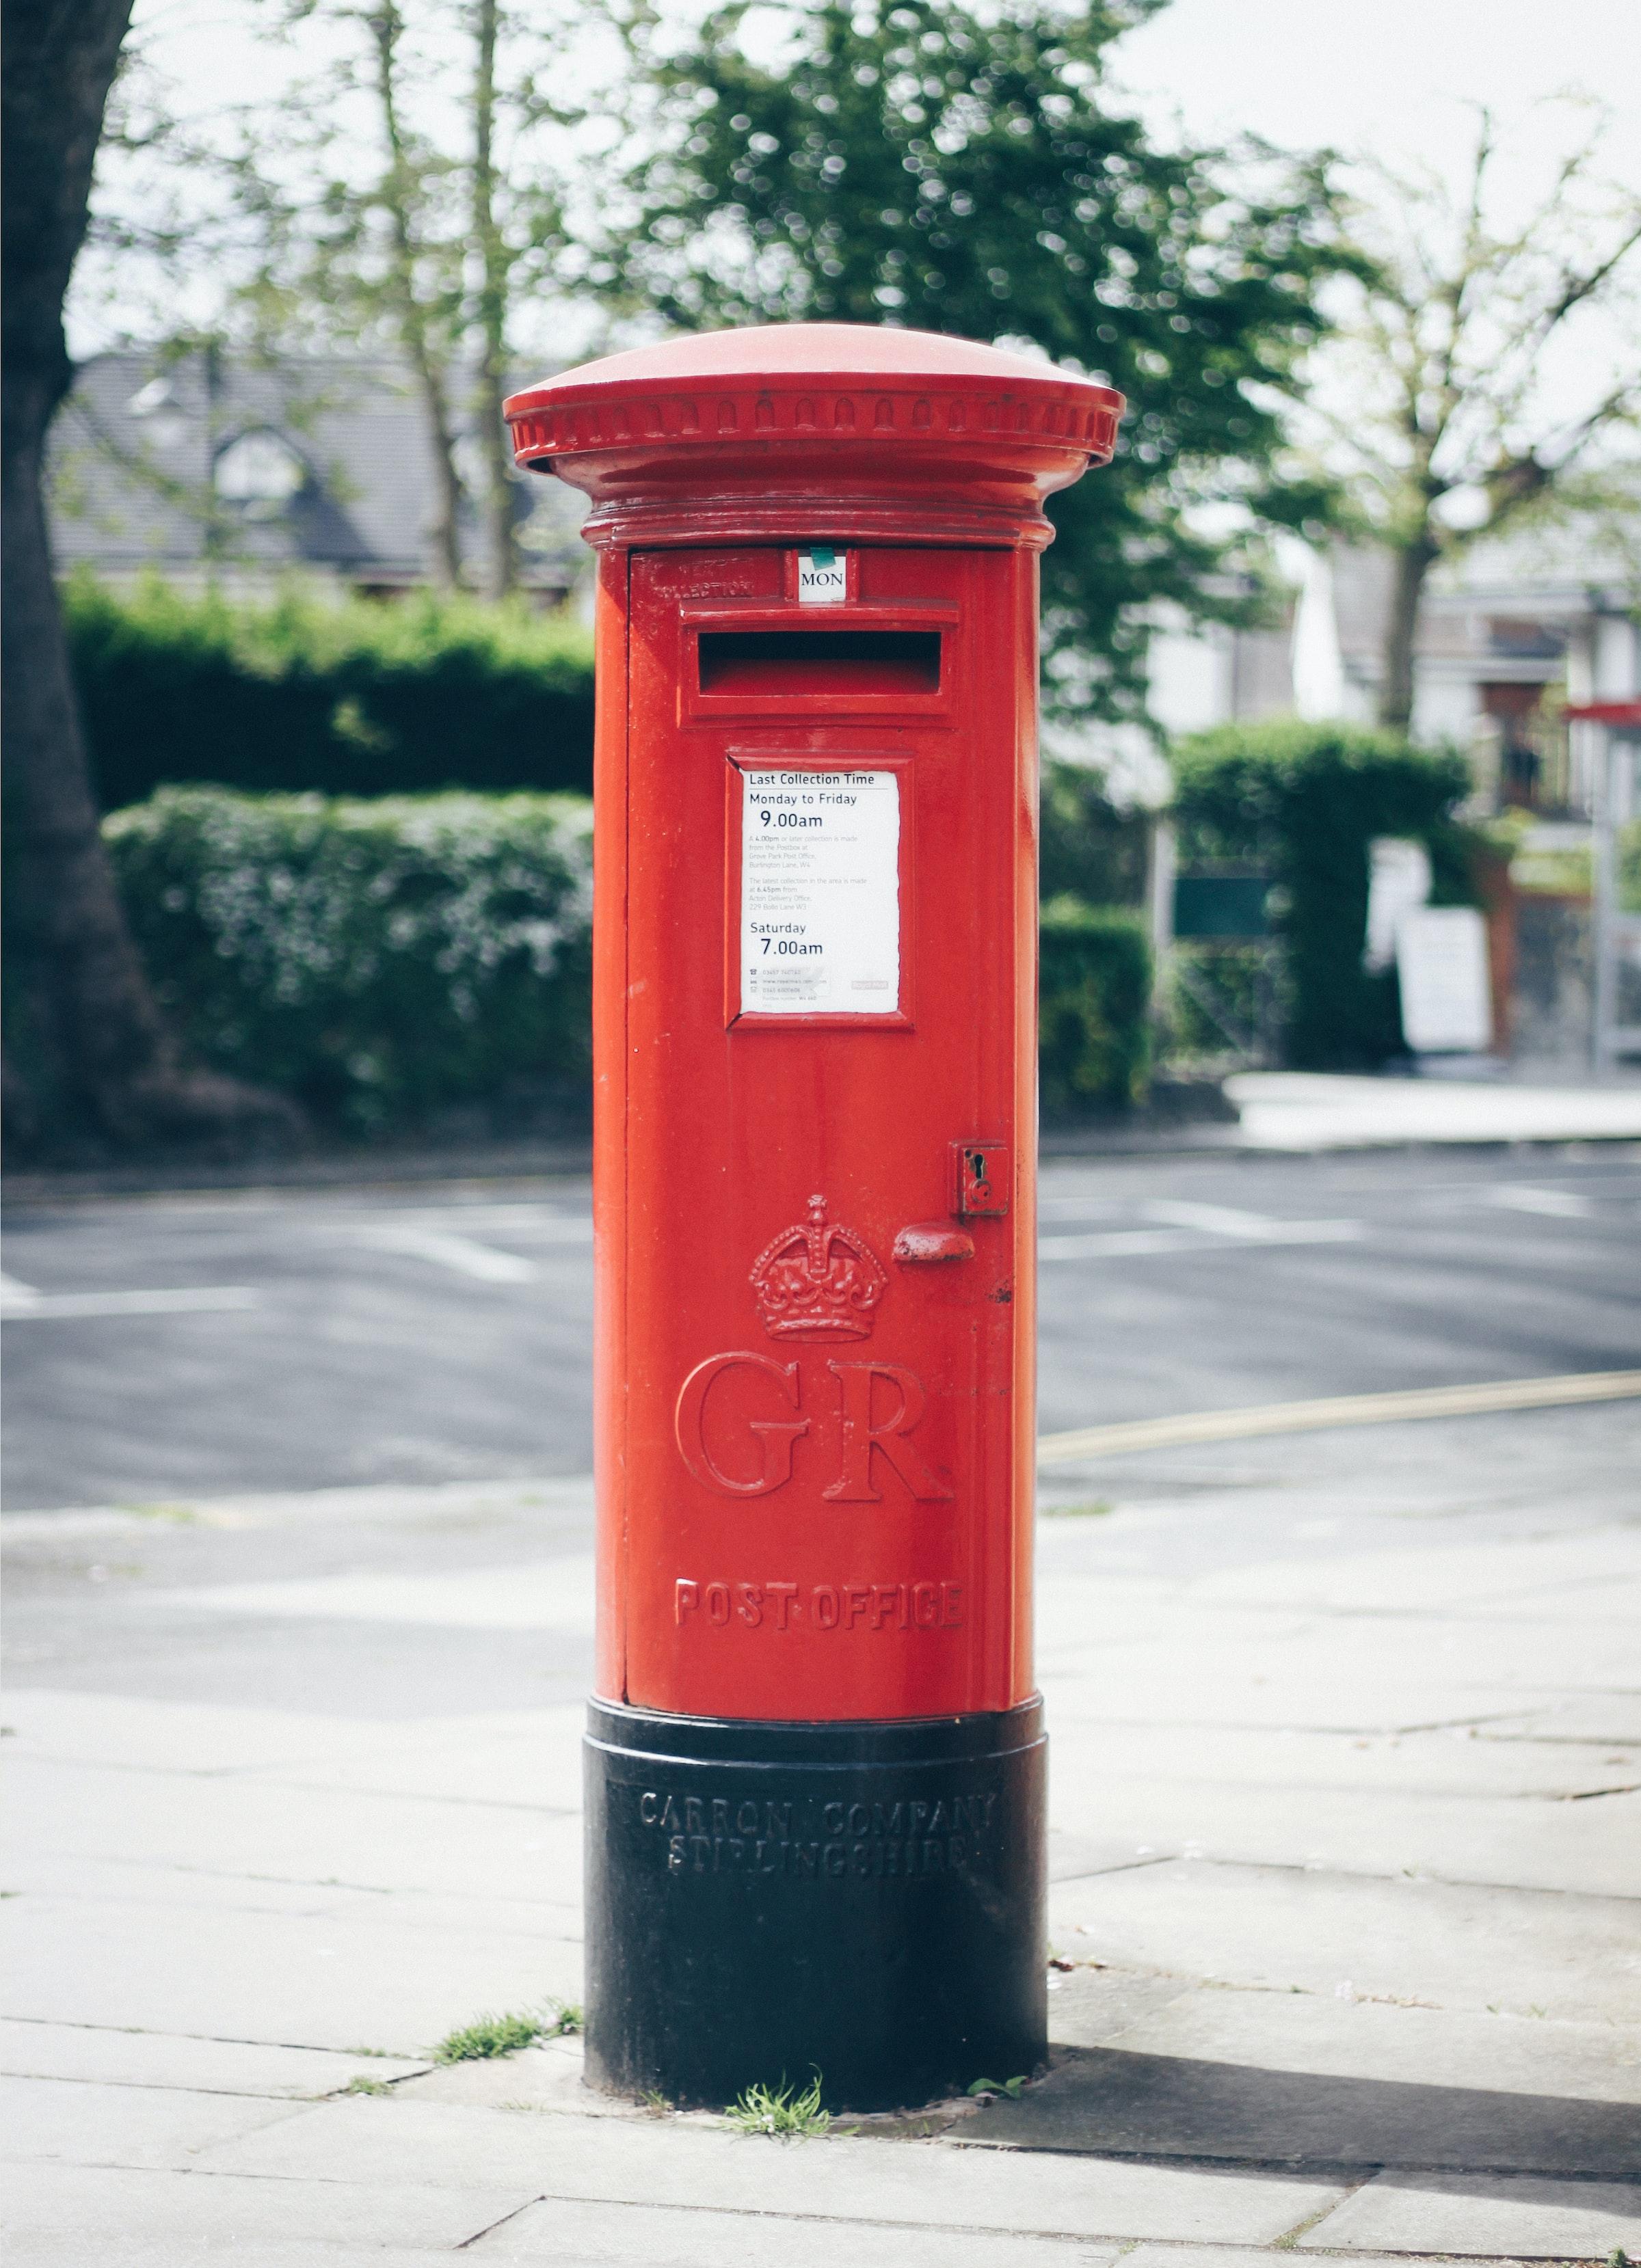 A red UK post box